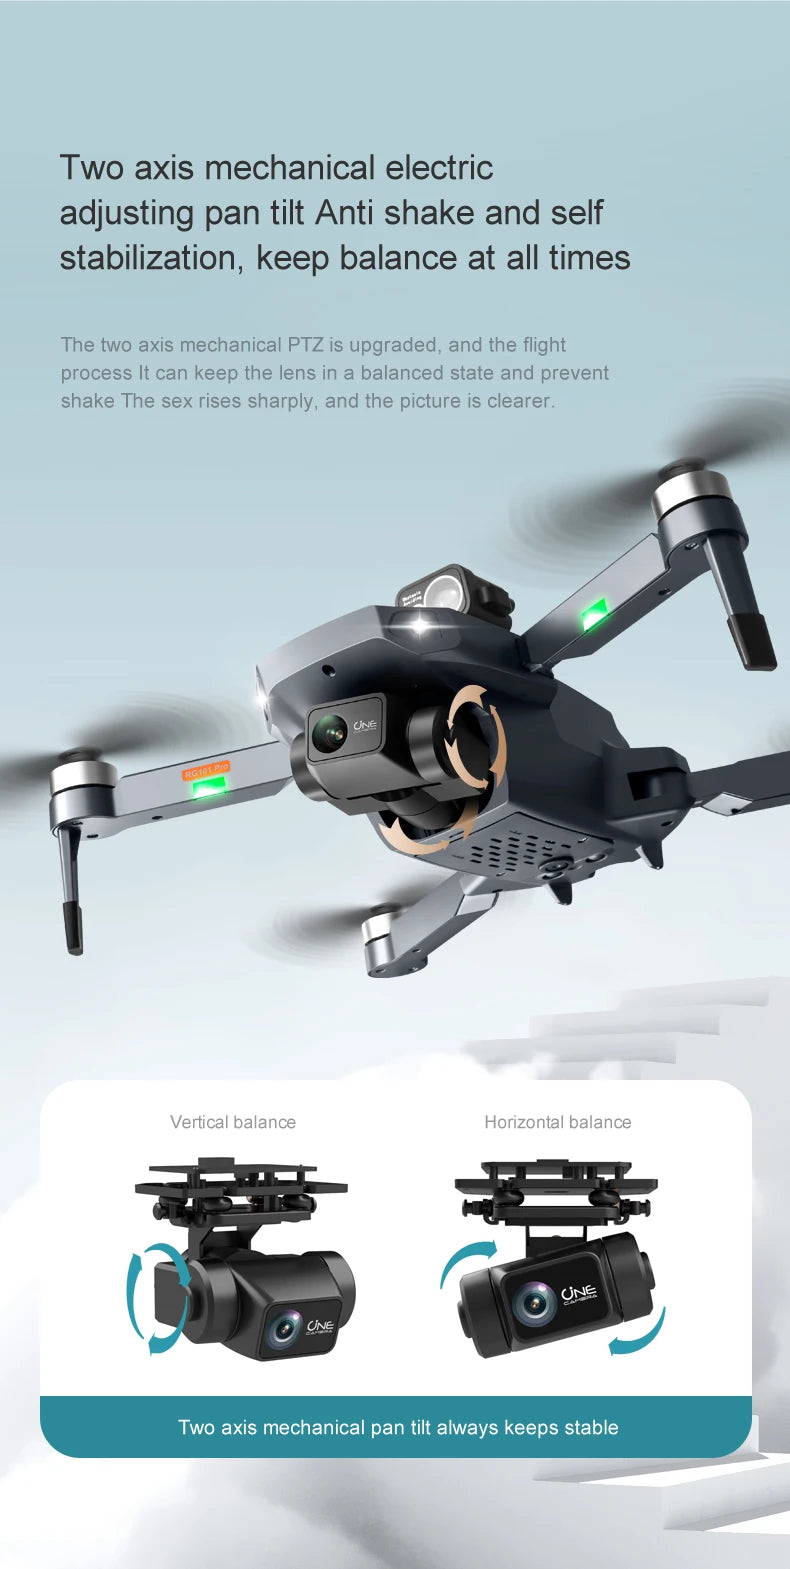 RG101 PRO Drone, two axis mechanical electric adjusting pan tilt keeps lens in a balanced state .